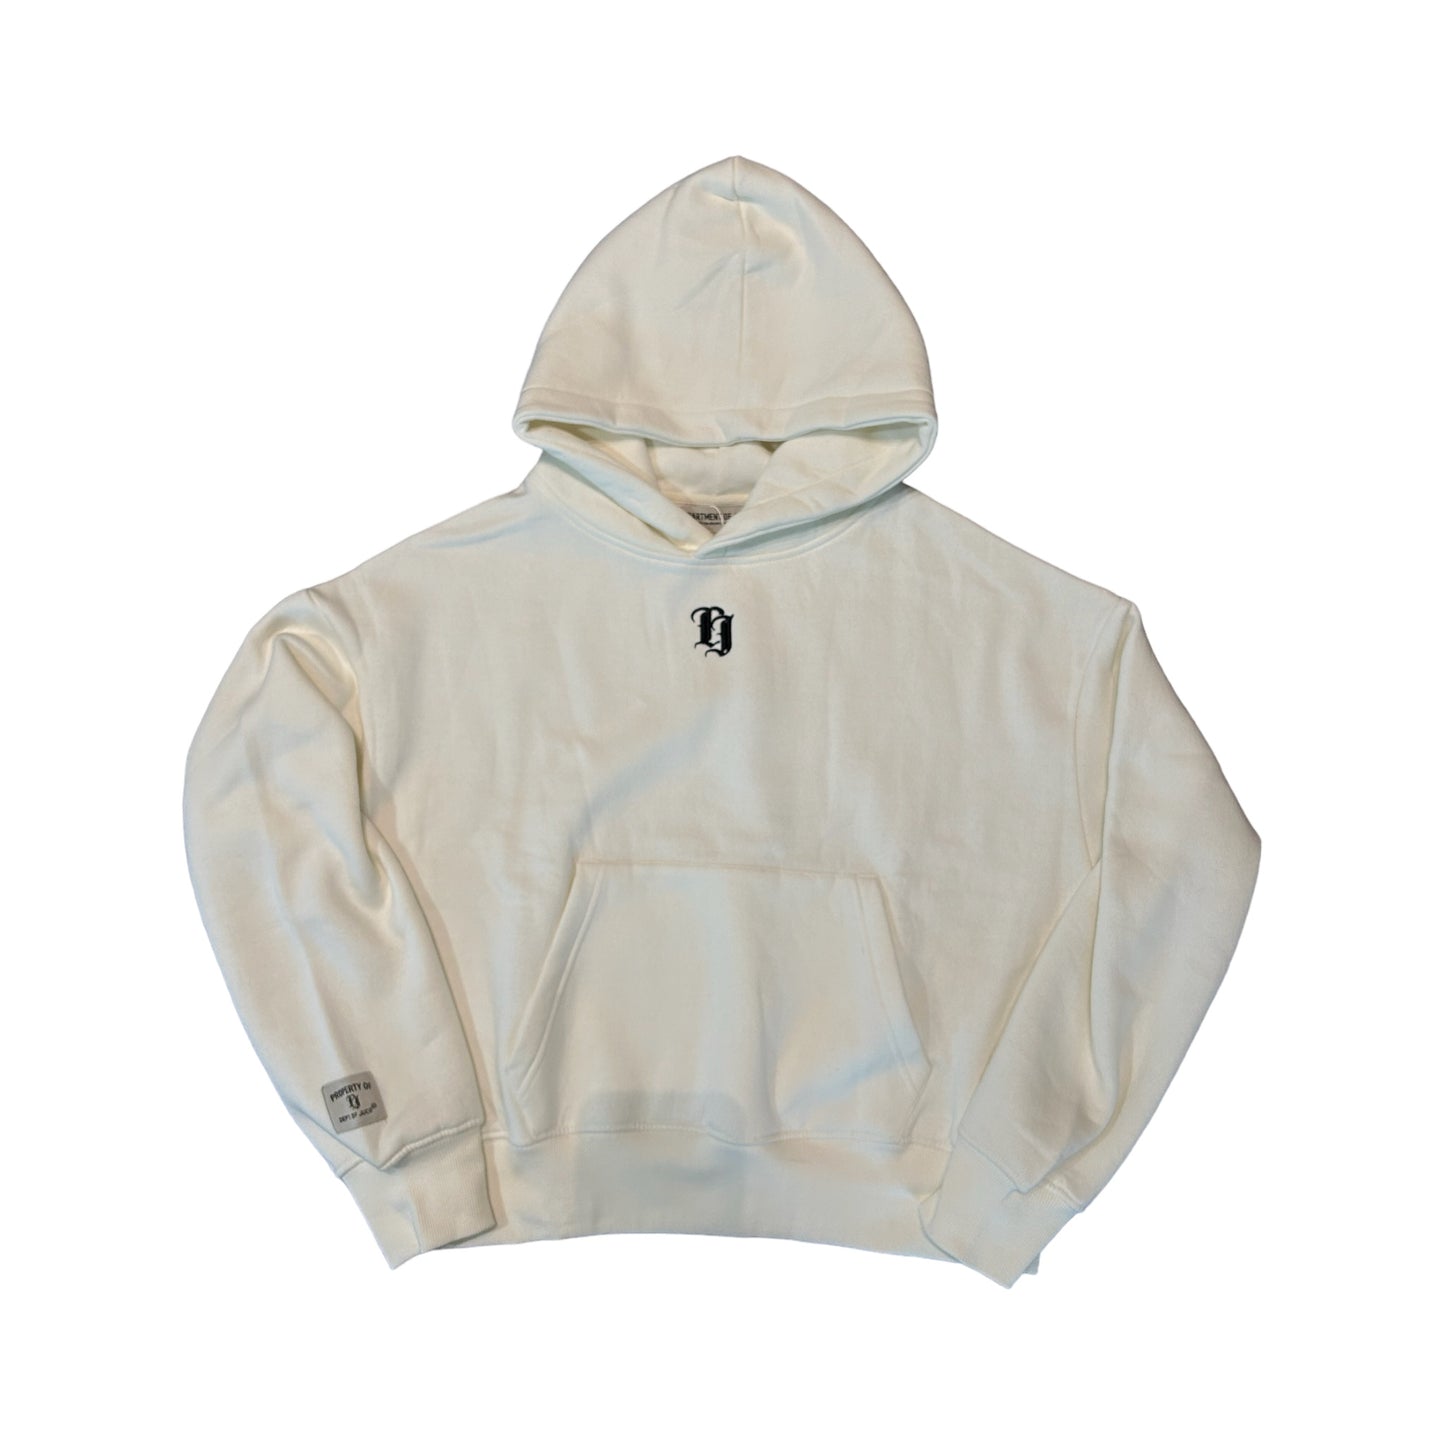 SS002 Hoodie - "Players Only"